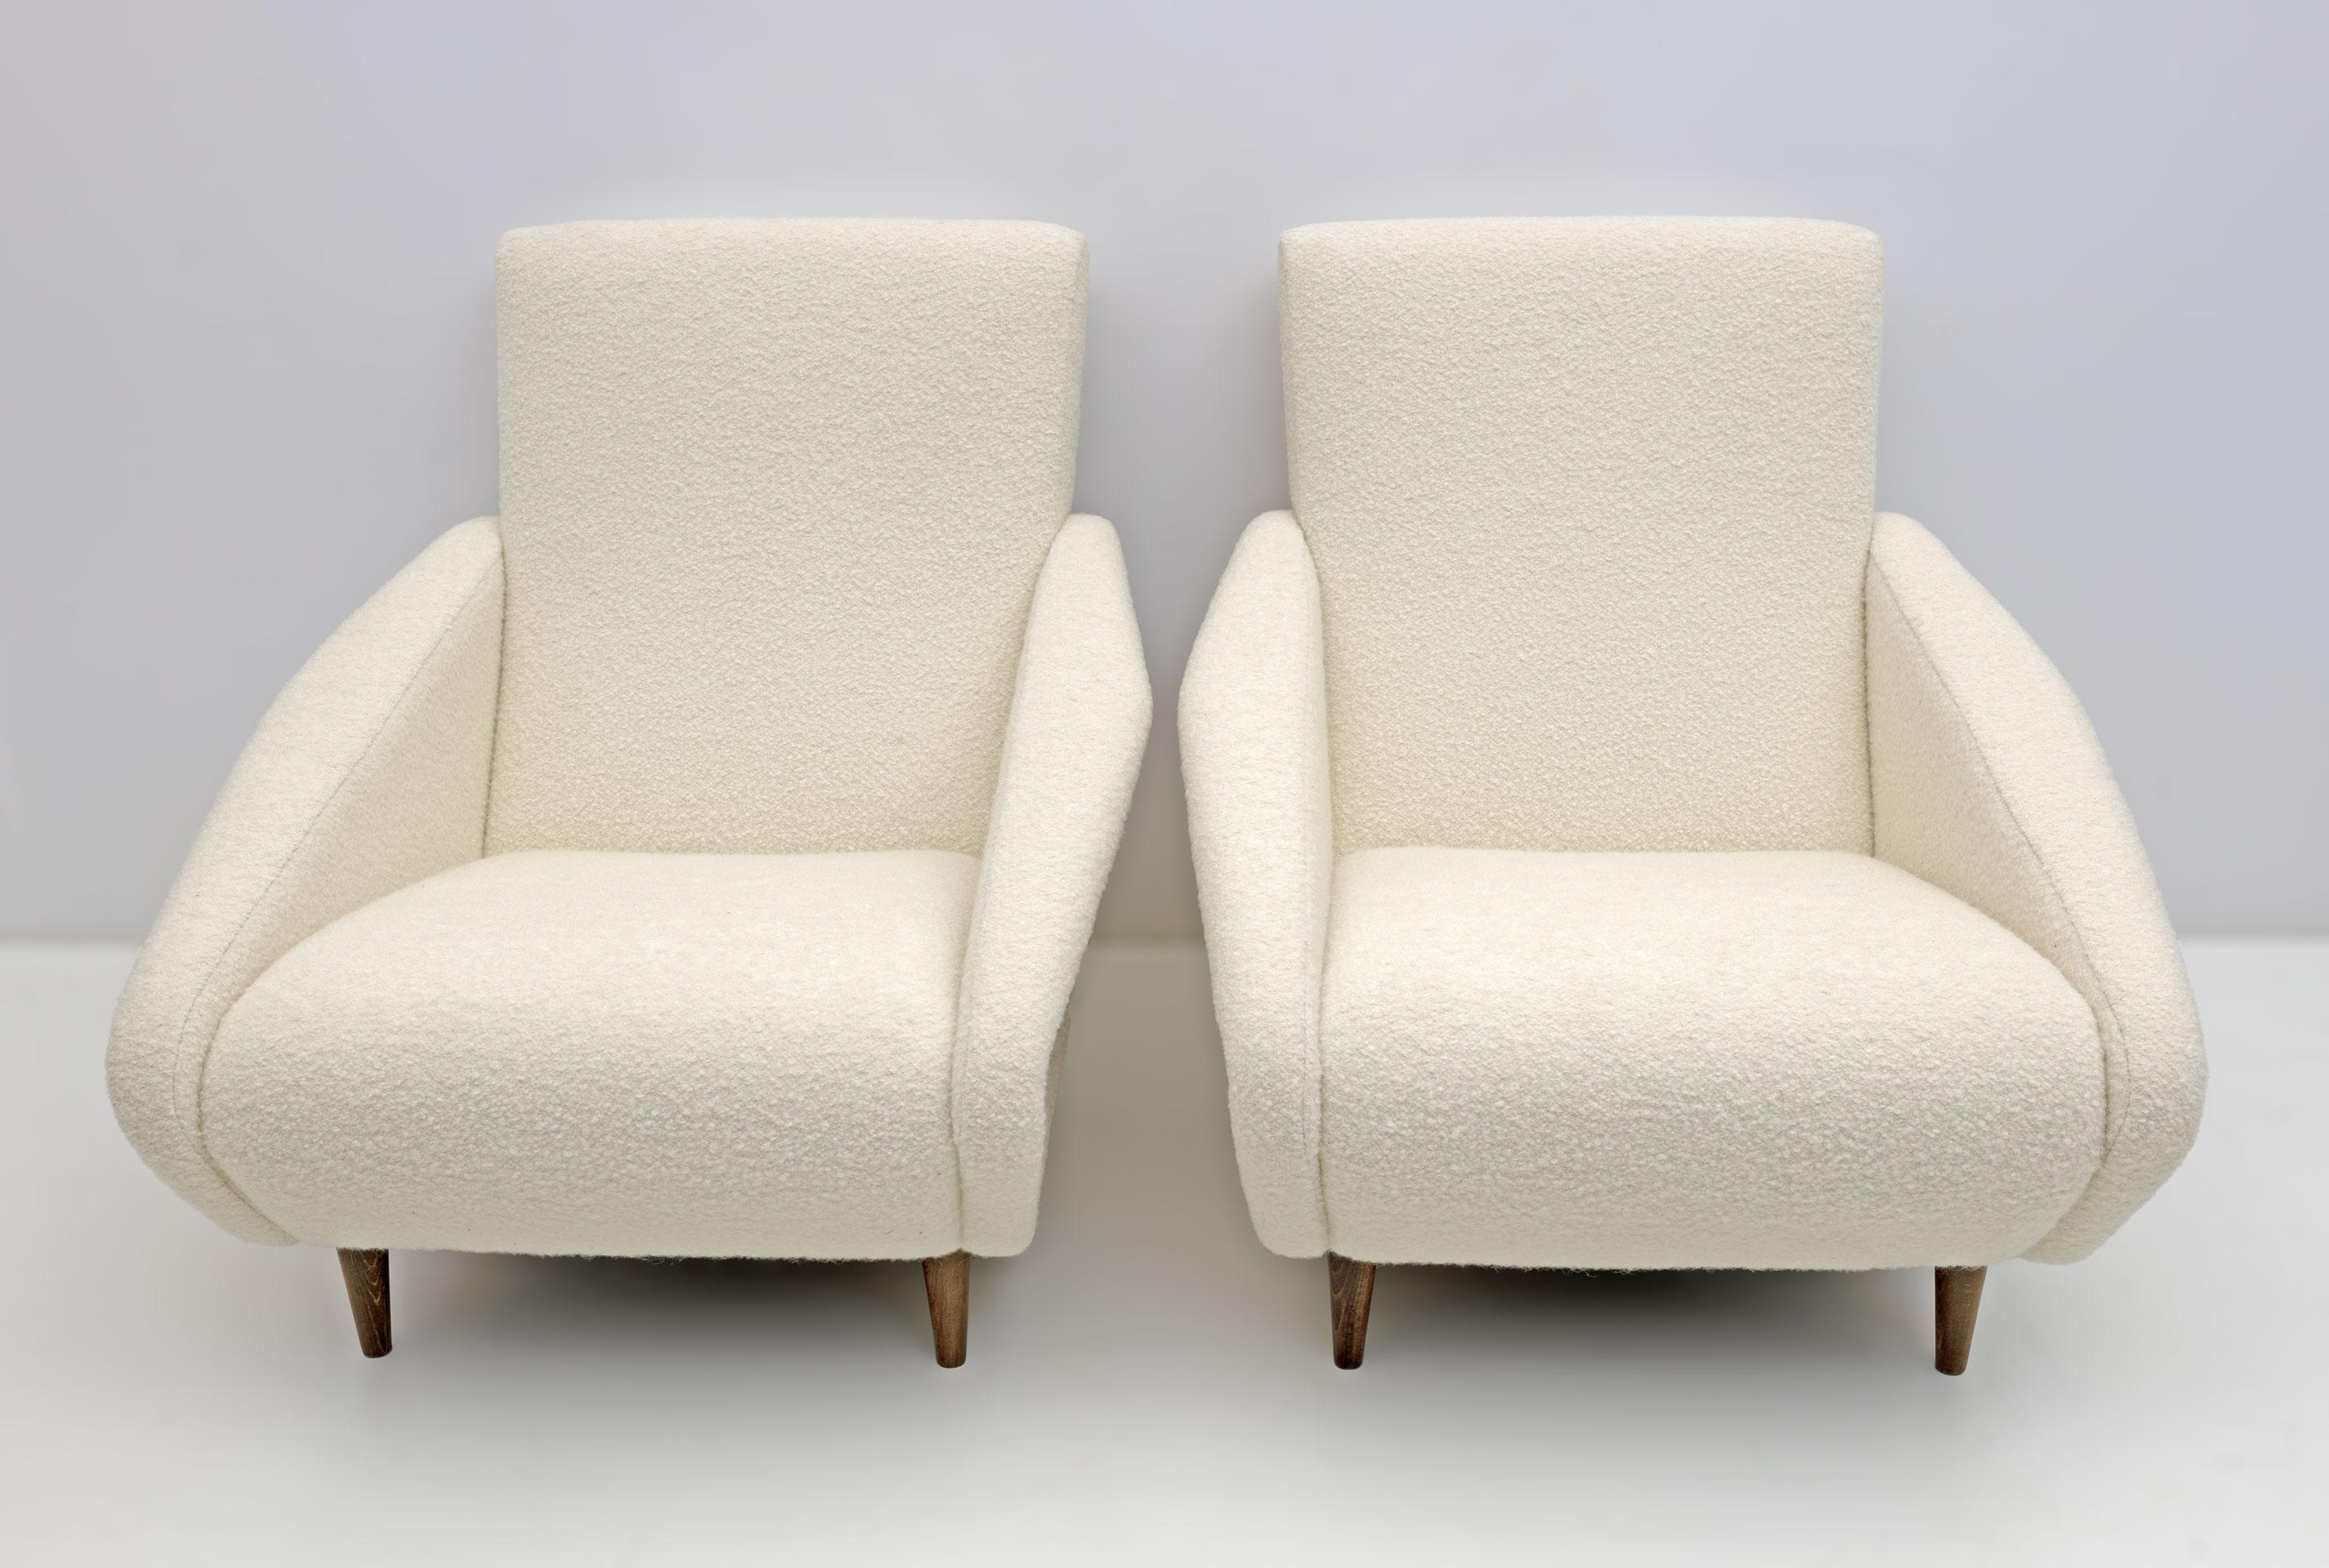 Pair of Bouclè wool armchairs, Distex 807 armchairs by Gio Ponti. Completely restored and upholstered in Bouclè fabric